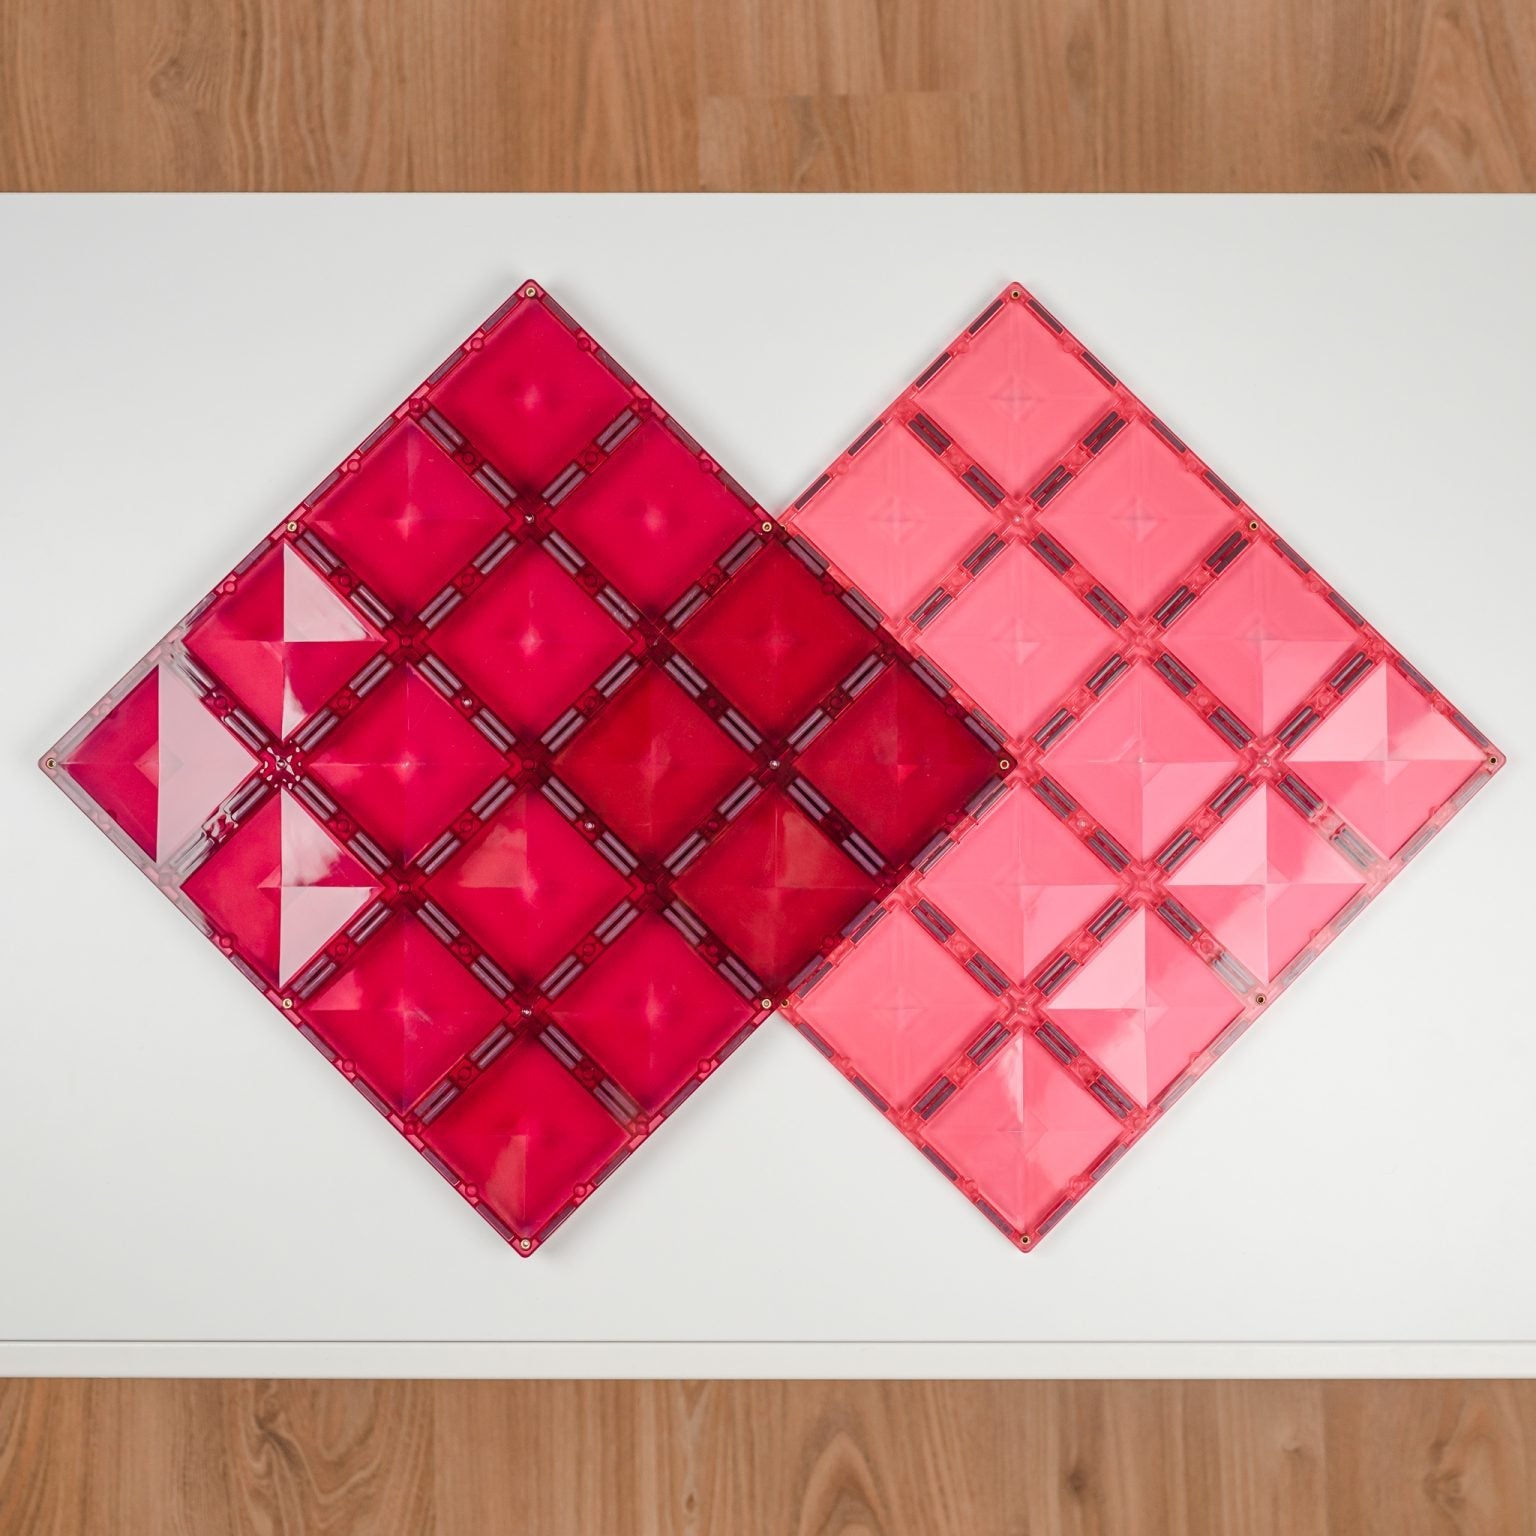 connetix magnetic tiles 2 piece  pink & berry  base plate pack